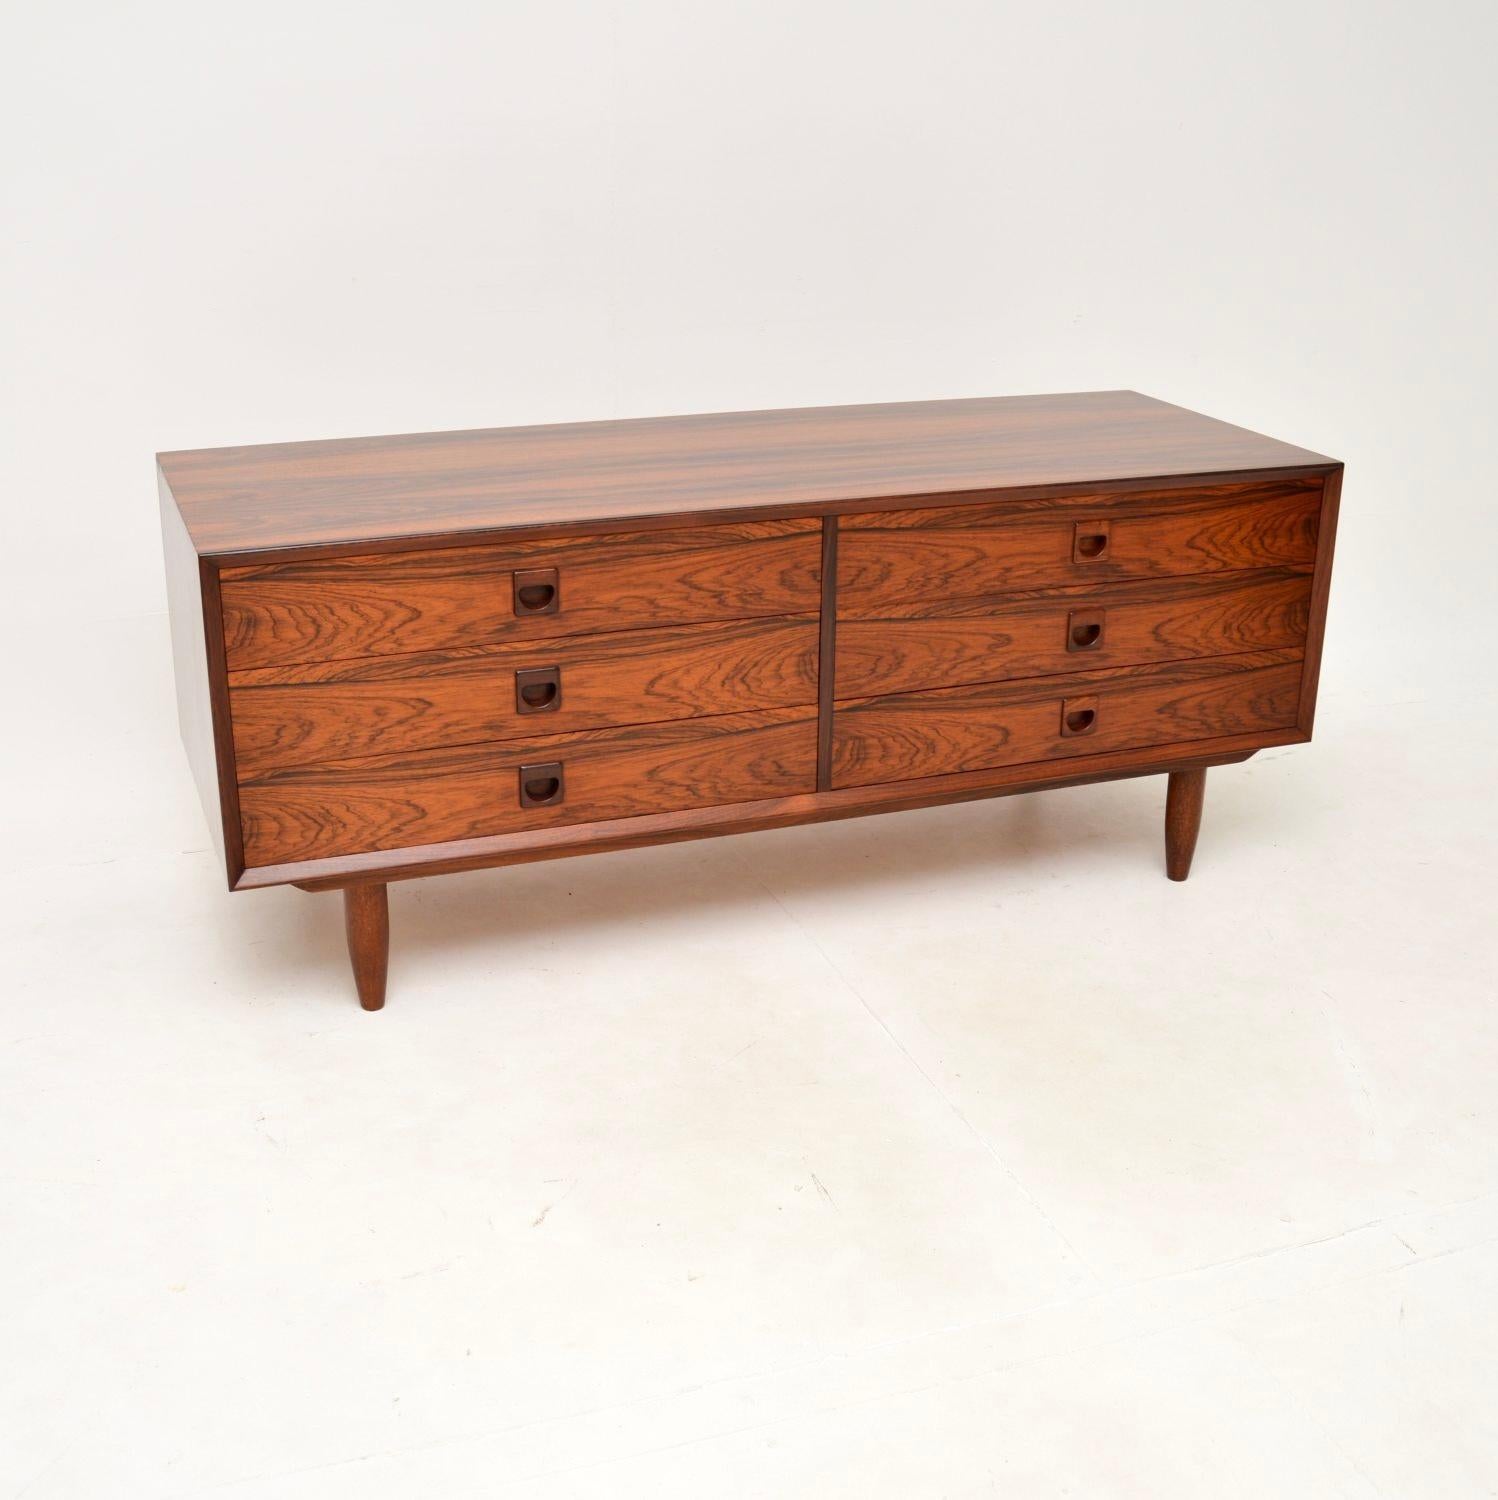 A stunning Danish vintage sideboard / chest of drawers. This was made by Brouer Mobelfabrik in Denmark, it dates from the 1960’s.

The quality is outstanding, this is beautifully crafted and is a very useful size. It is perfect as a low sideboard /